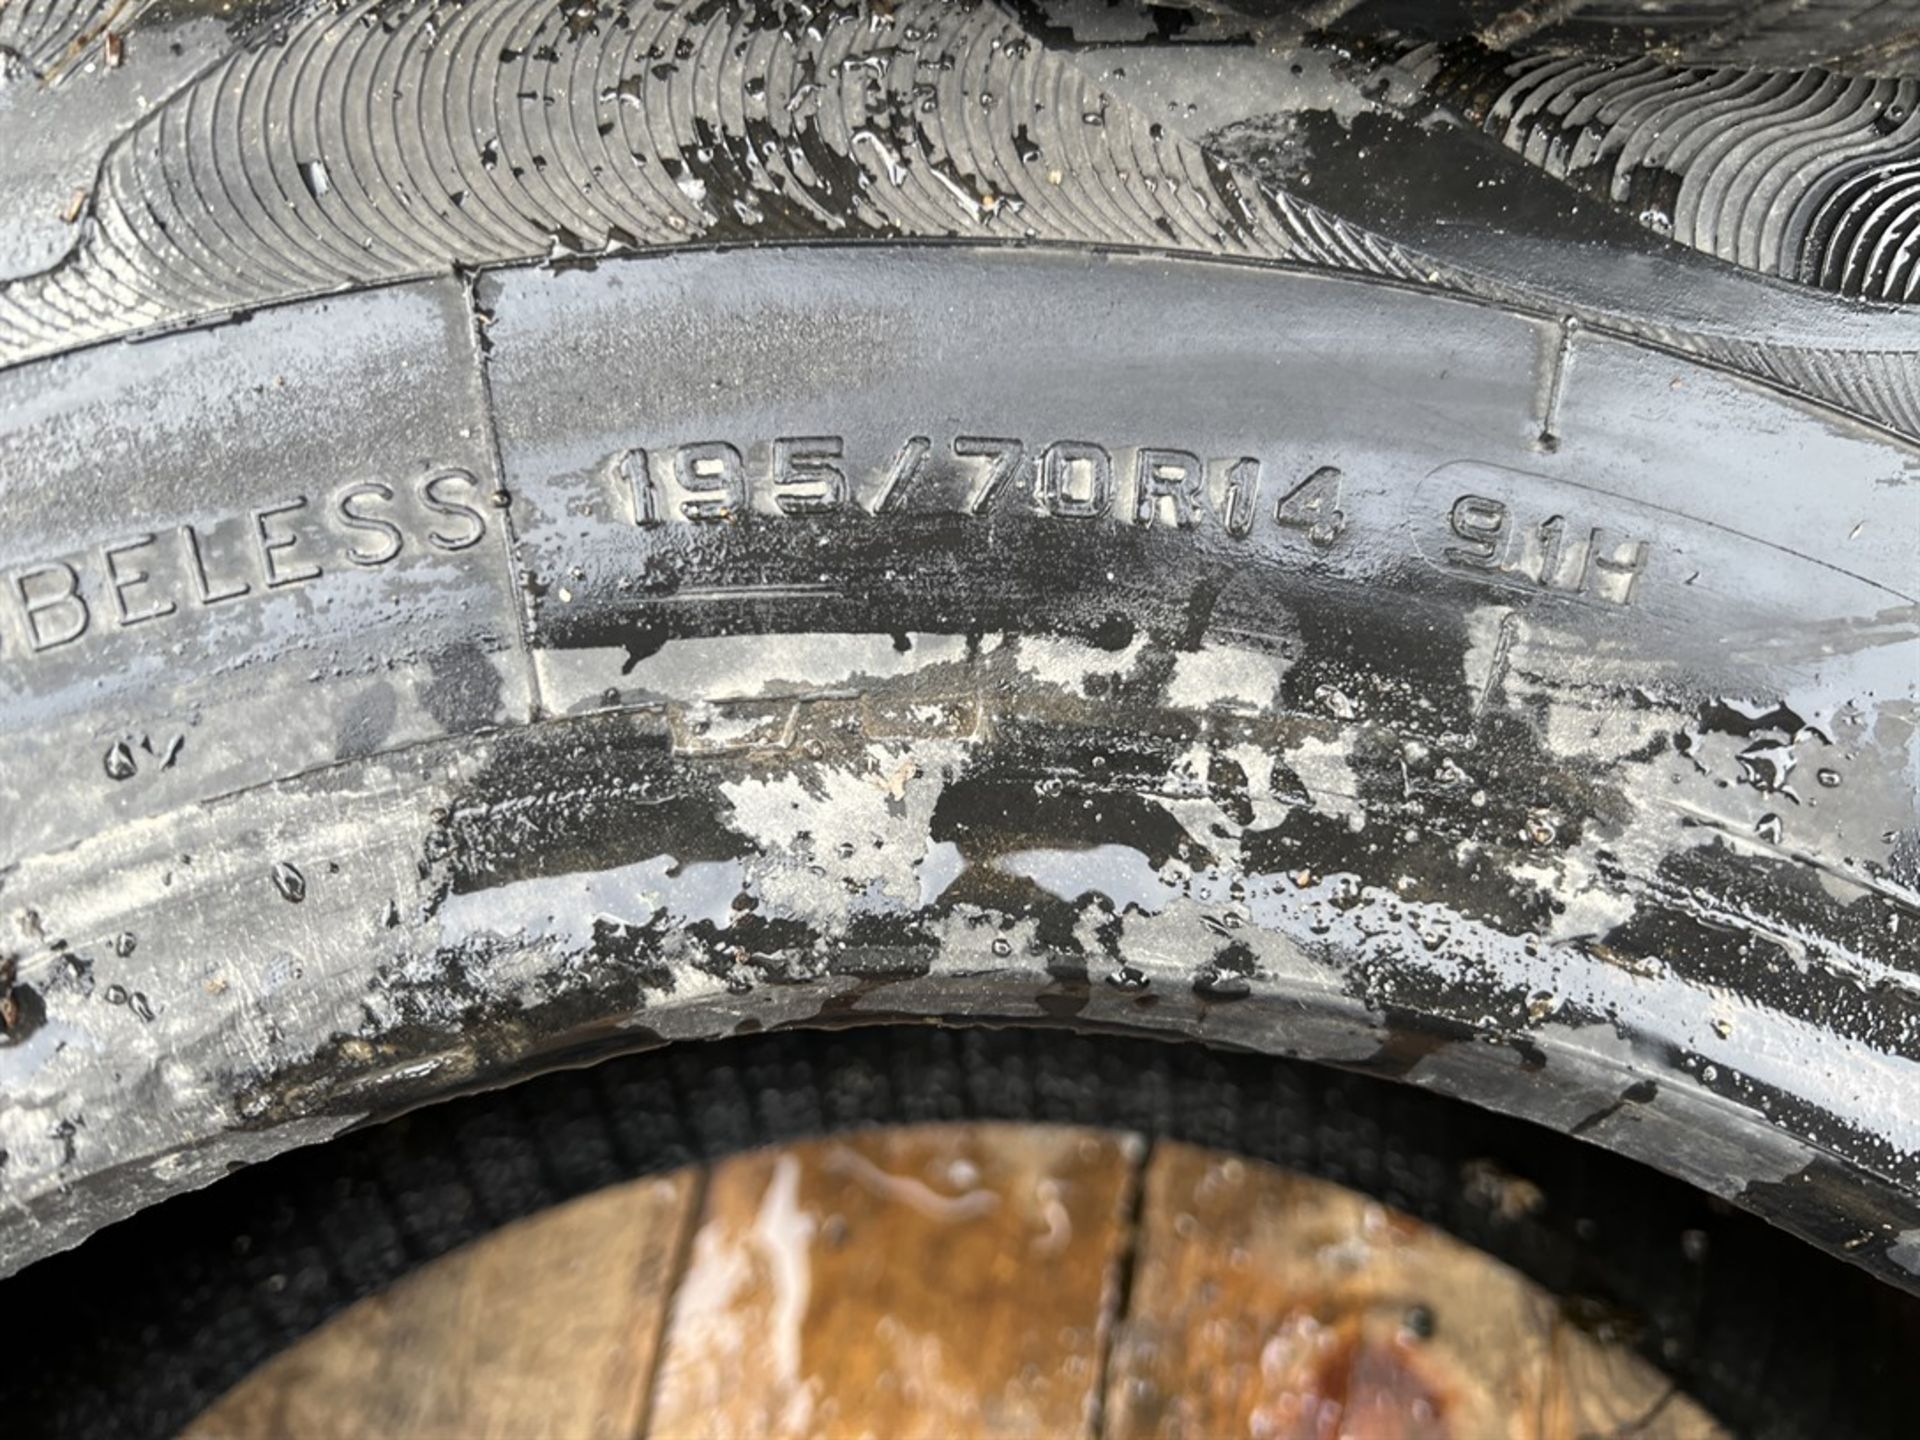 Lot Comprising (3) Tires, (1) 215/65R16 98T, (1) 195/65R15, and (1) 195/70R1491H Tubeless - Image 6 of 6